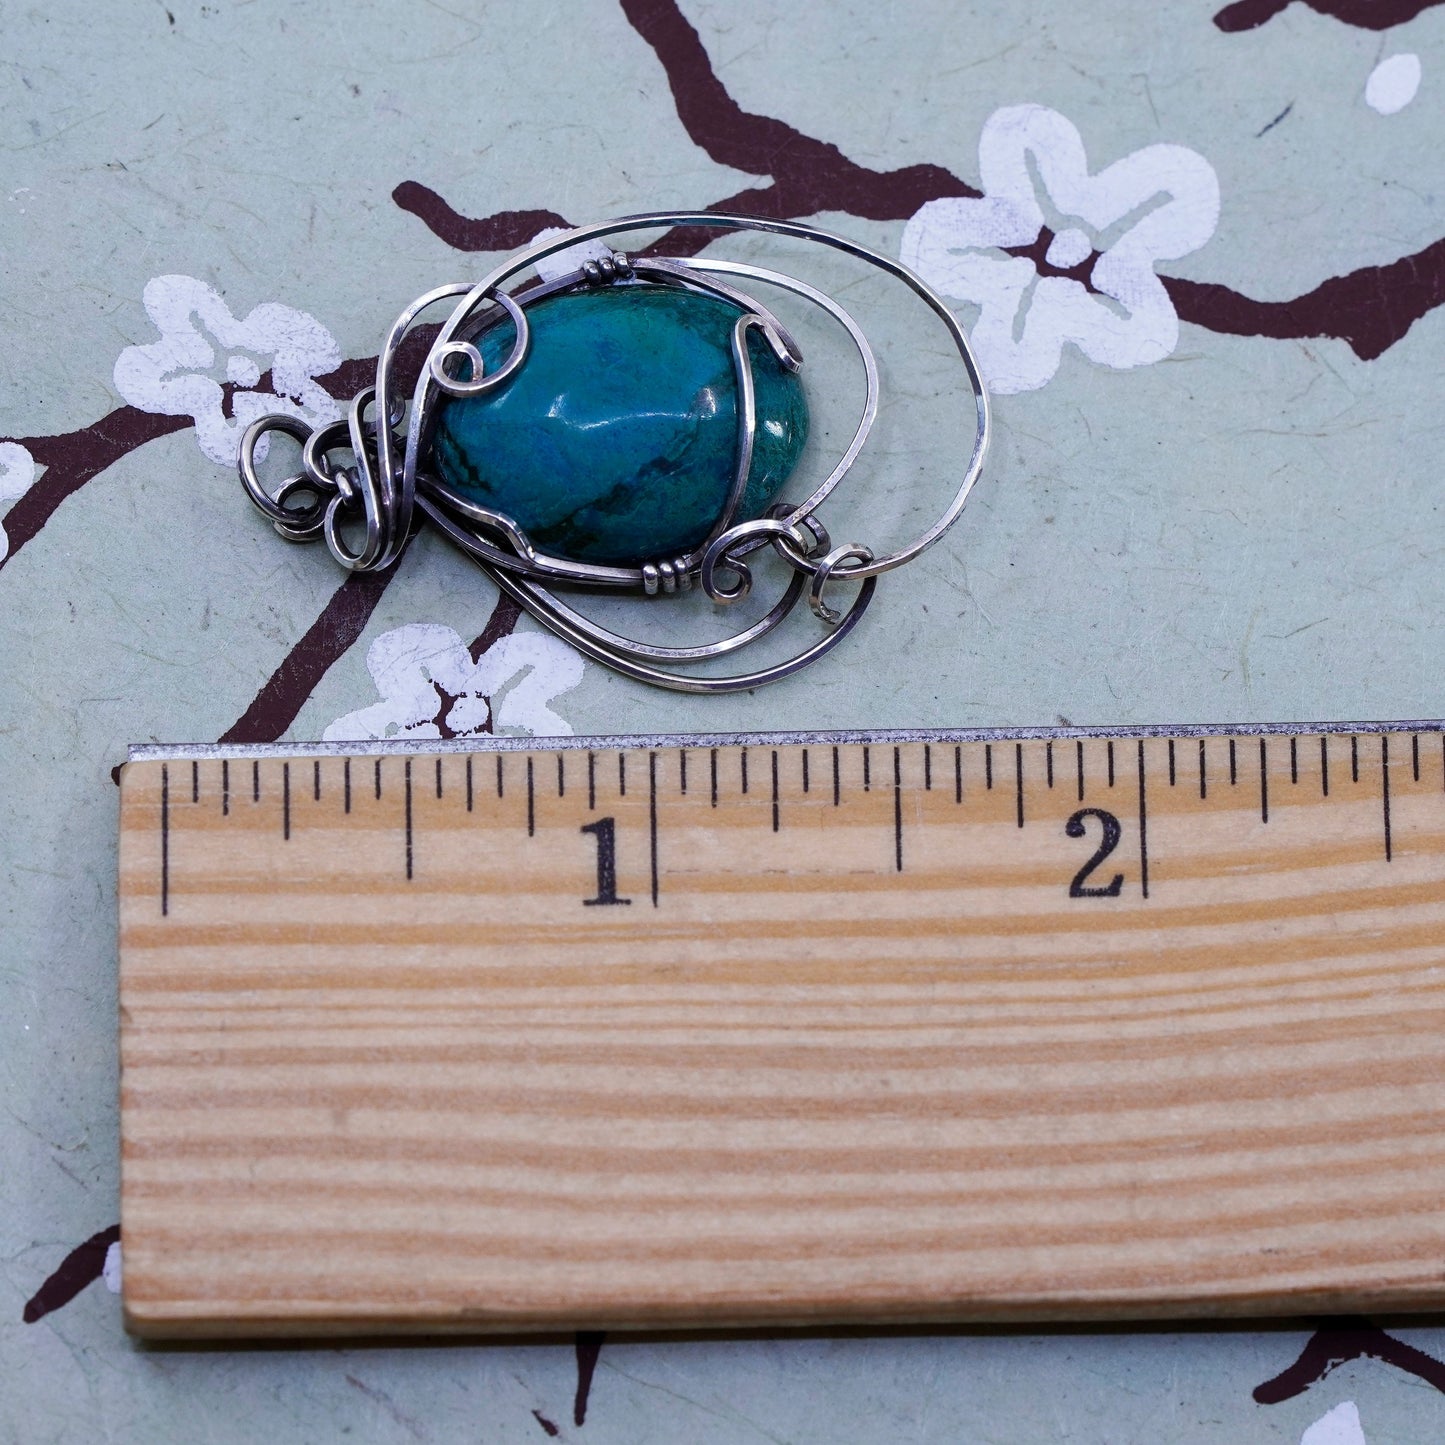 Southwestern Sterling silver handmade pendant, 925 wired with turquoise